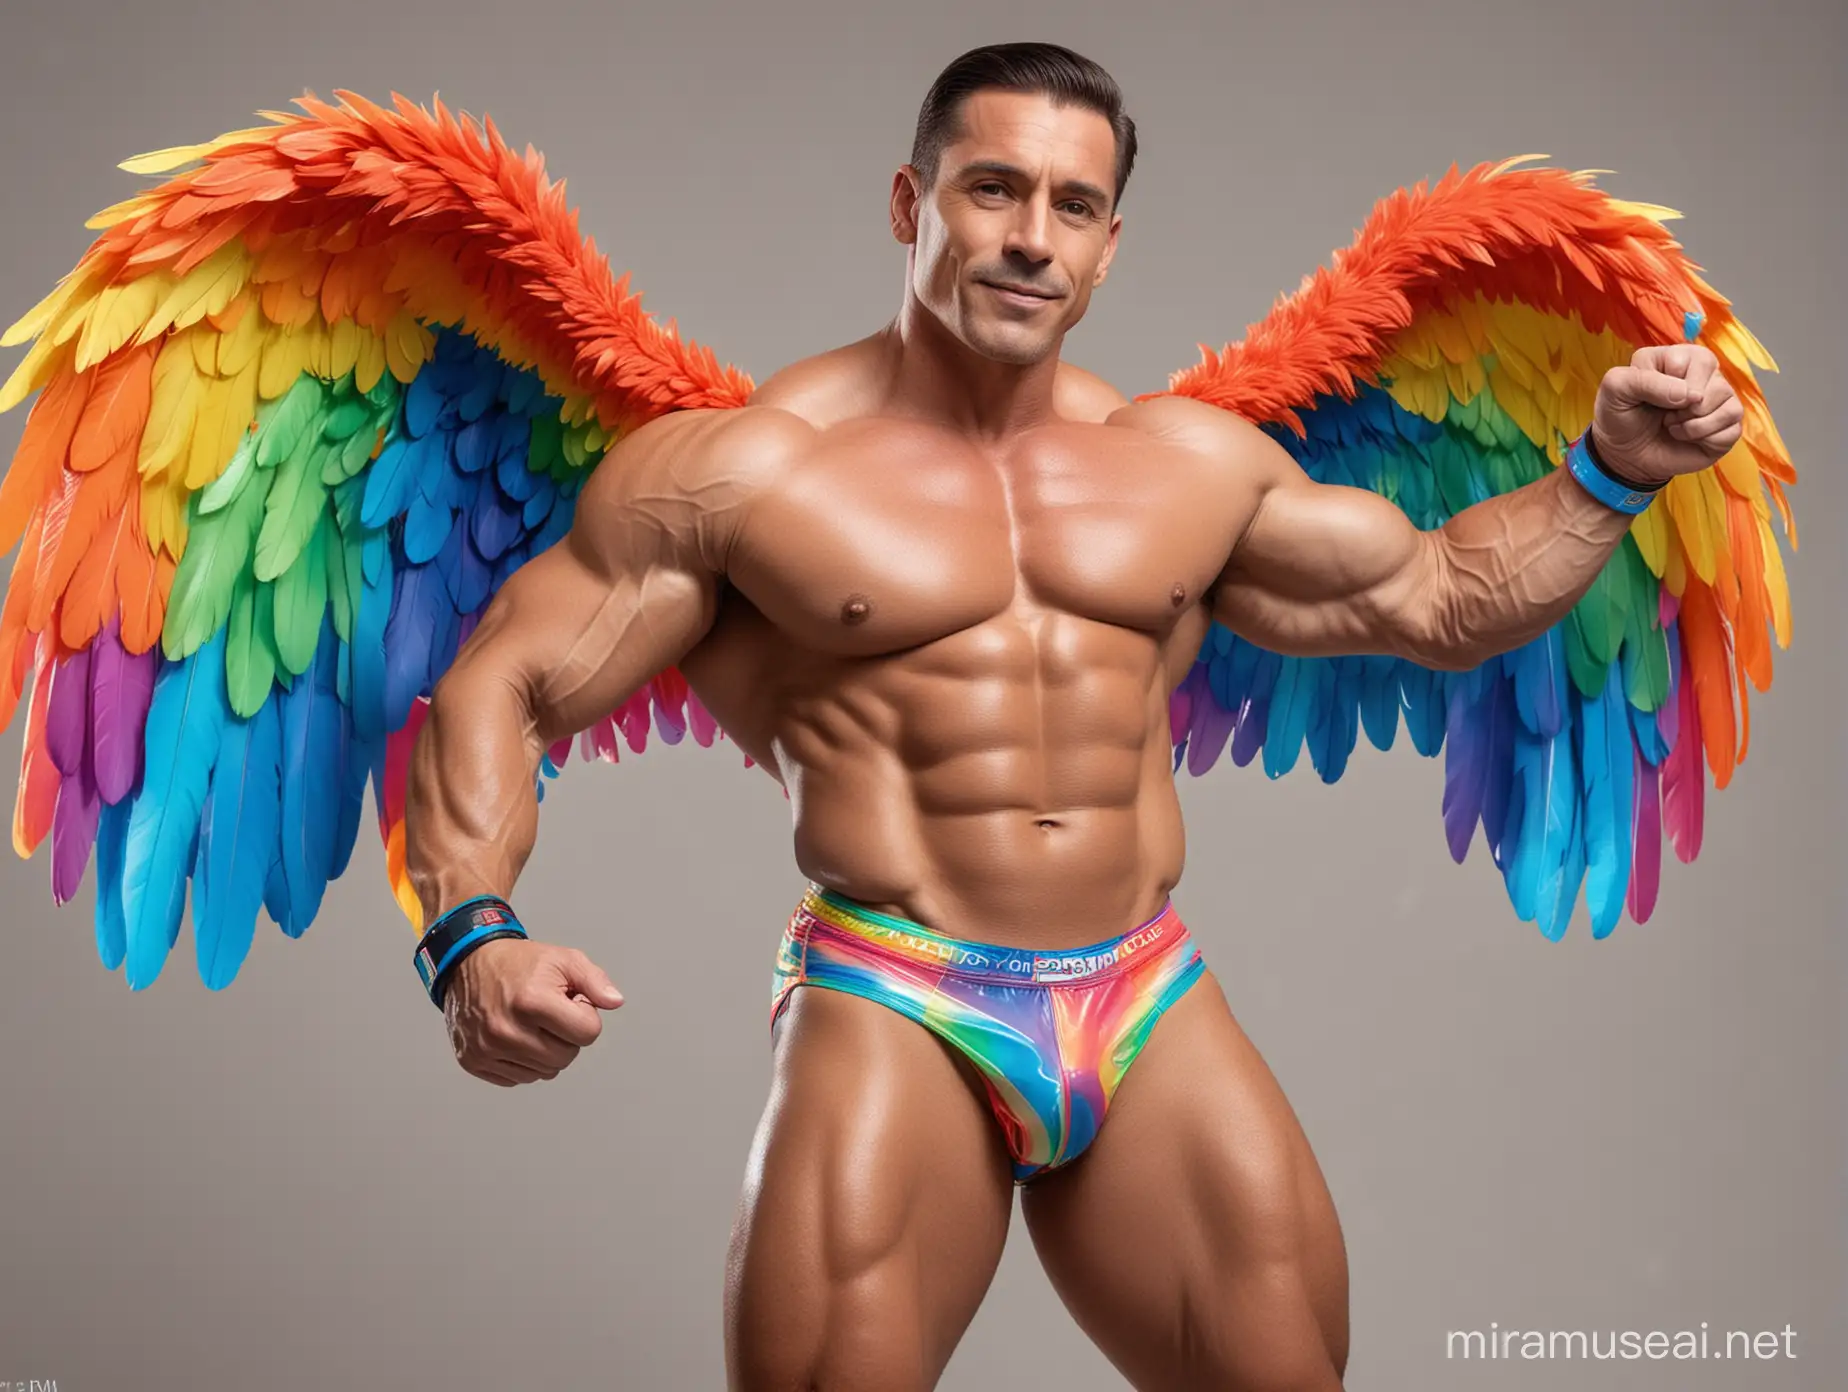 Topless 40s Ultra Beefy IFBB Bodybuilder Man wearing Multi-Highlighter Bright Rainbow Coloured See Through Eagle Wings Jacket short shorts and Flexing Big Strong Arm with Doraemon